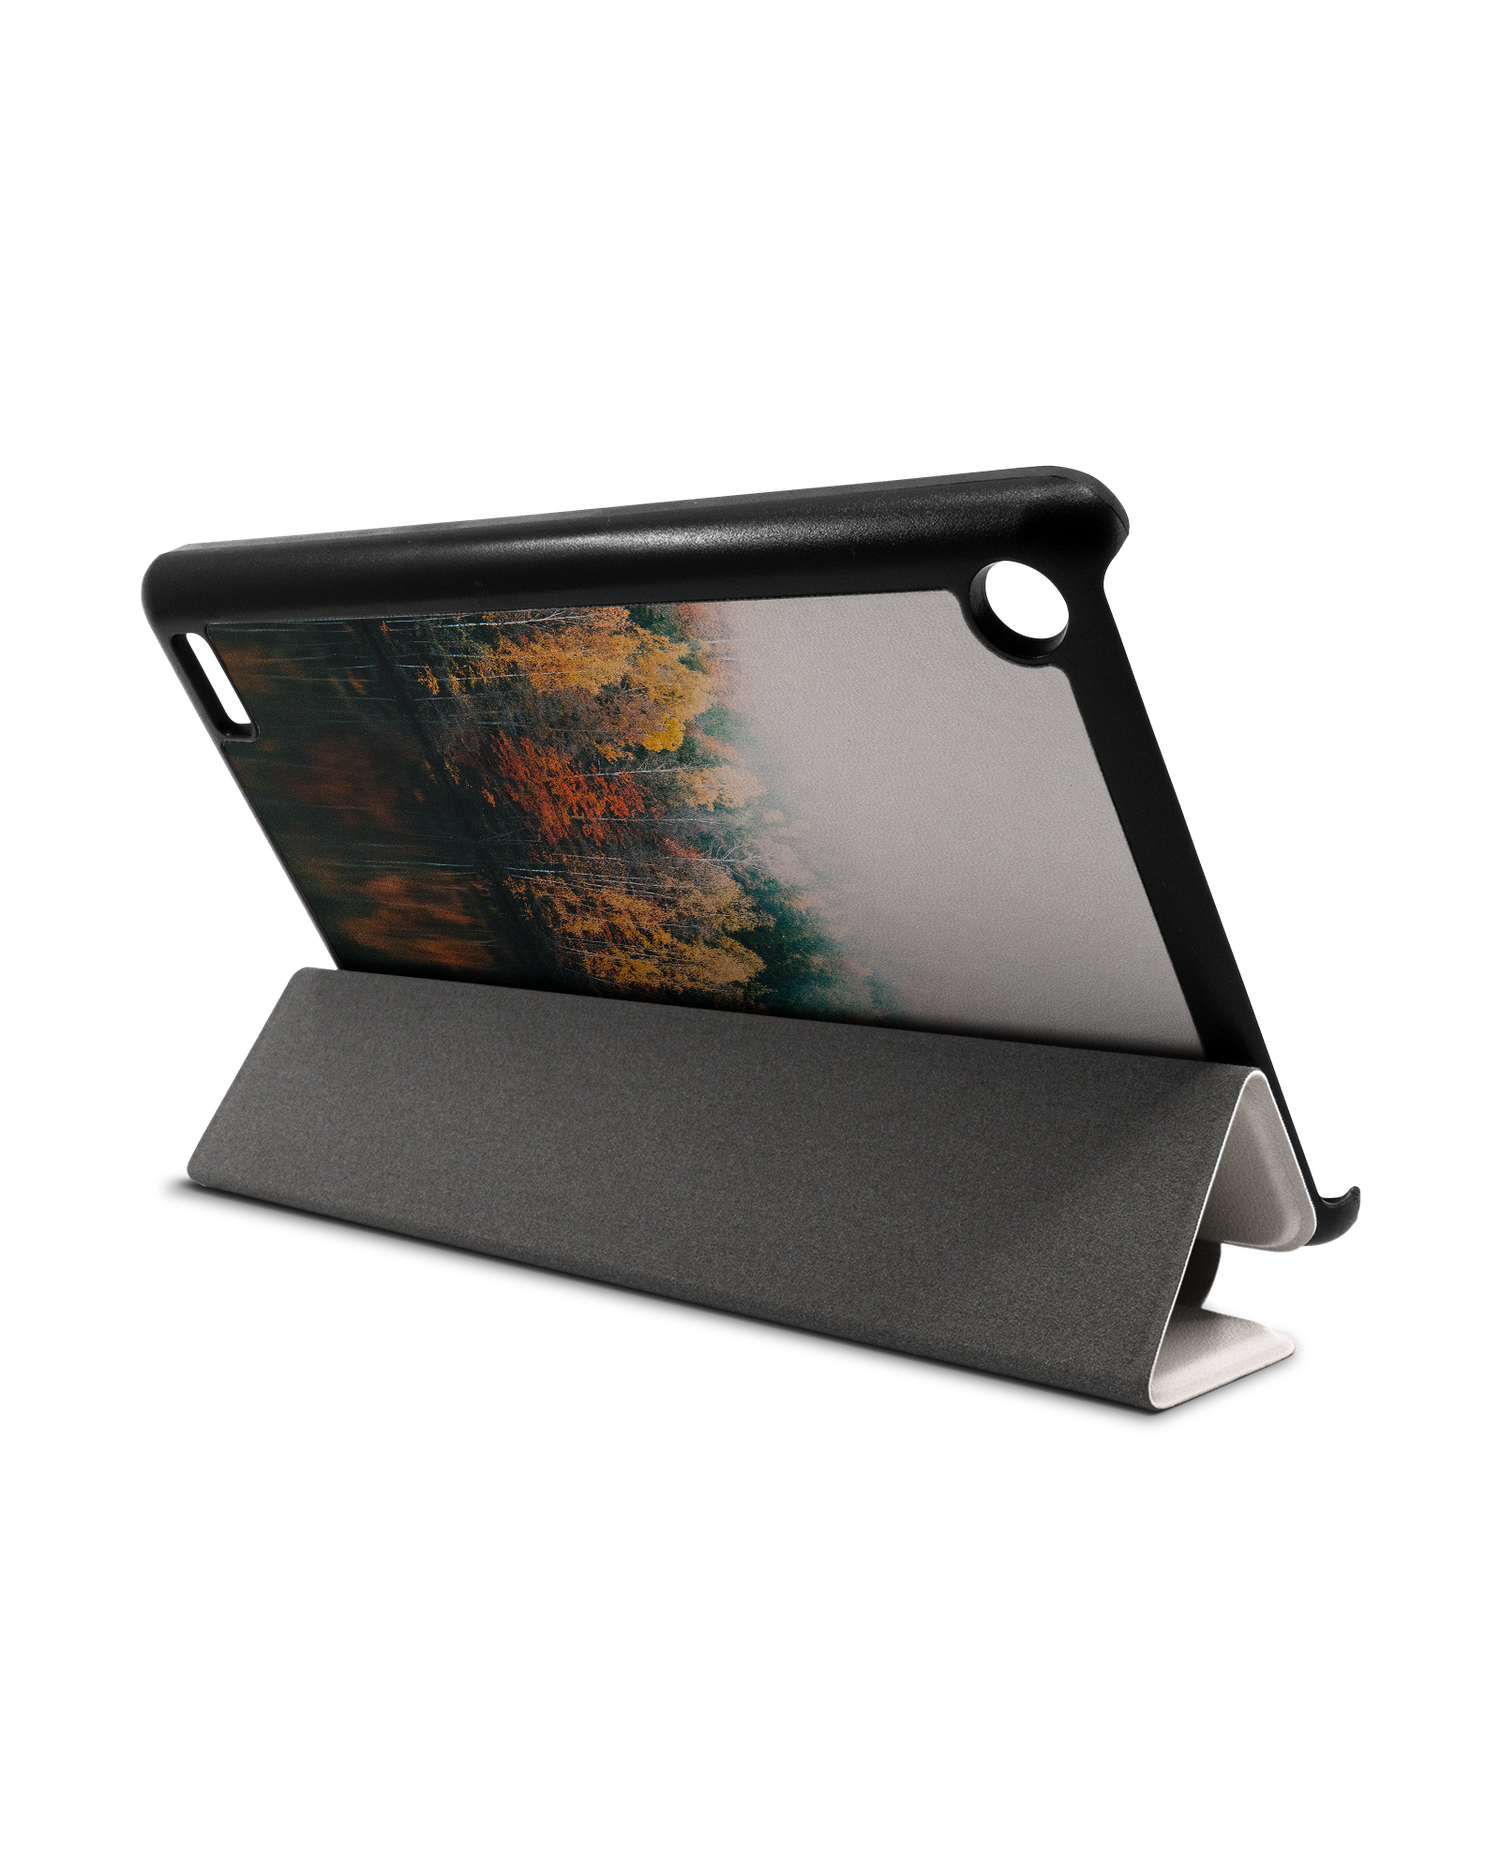 Fall Fog Tablet Smart Case for Amazon Fire 7: Used as Stand